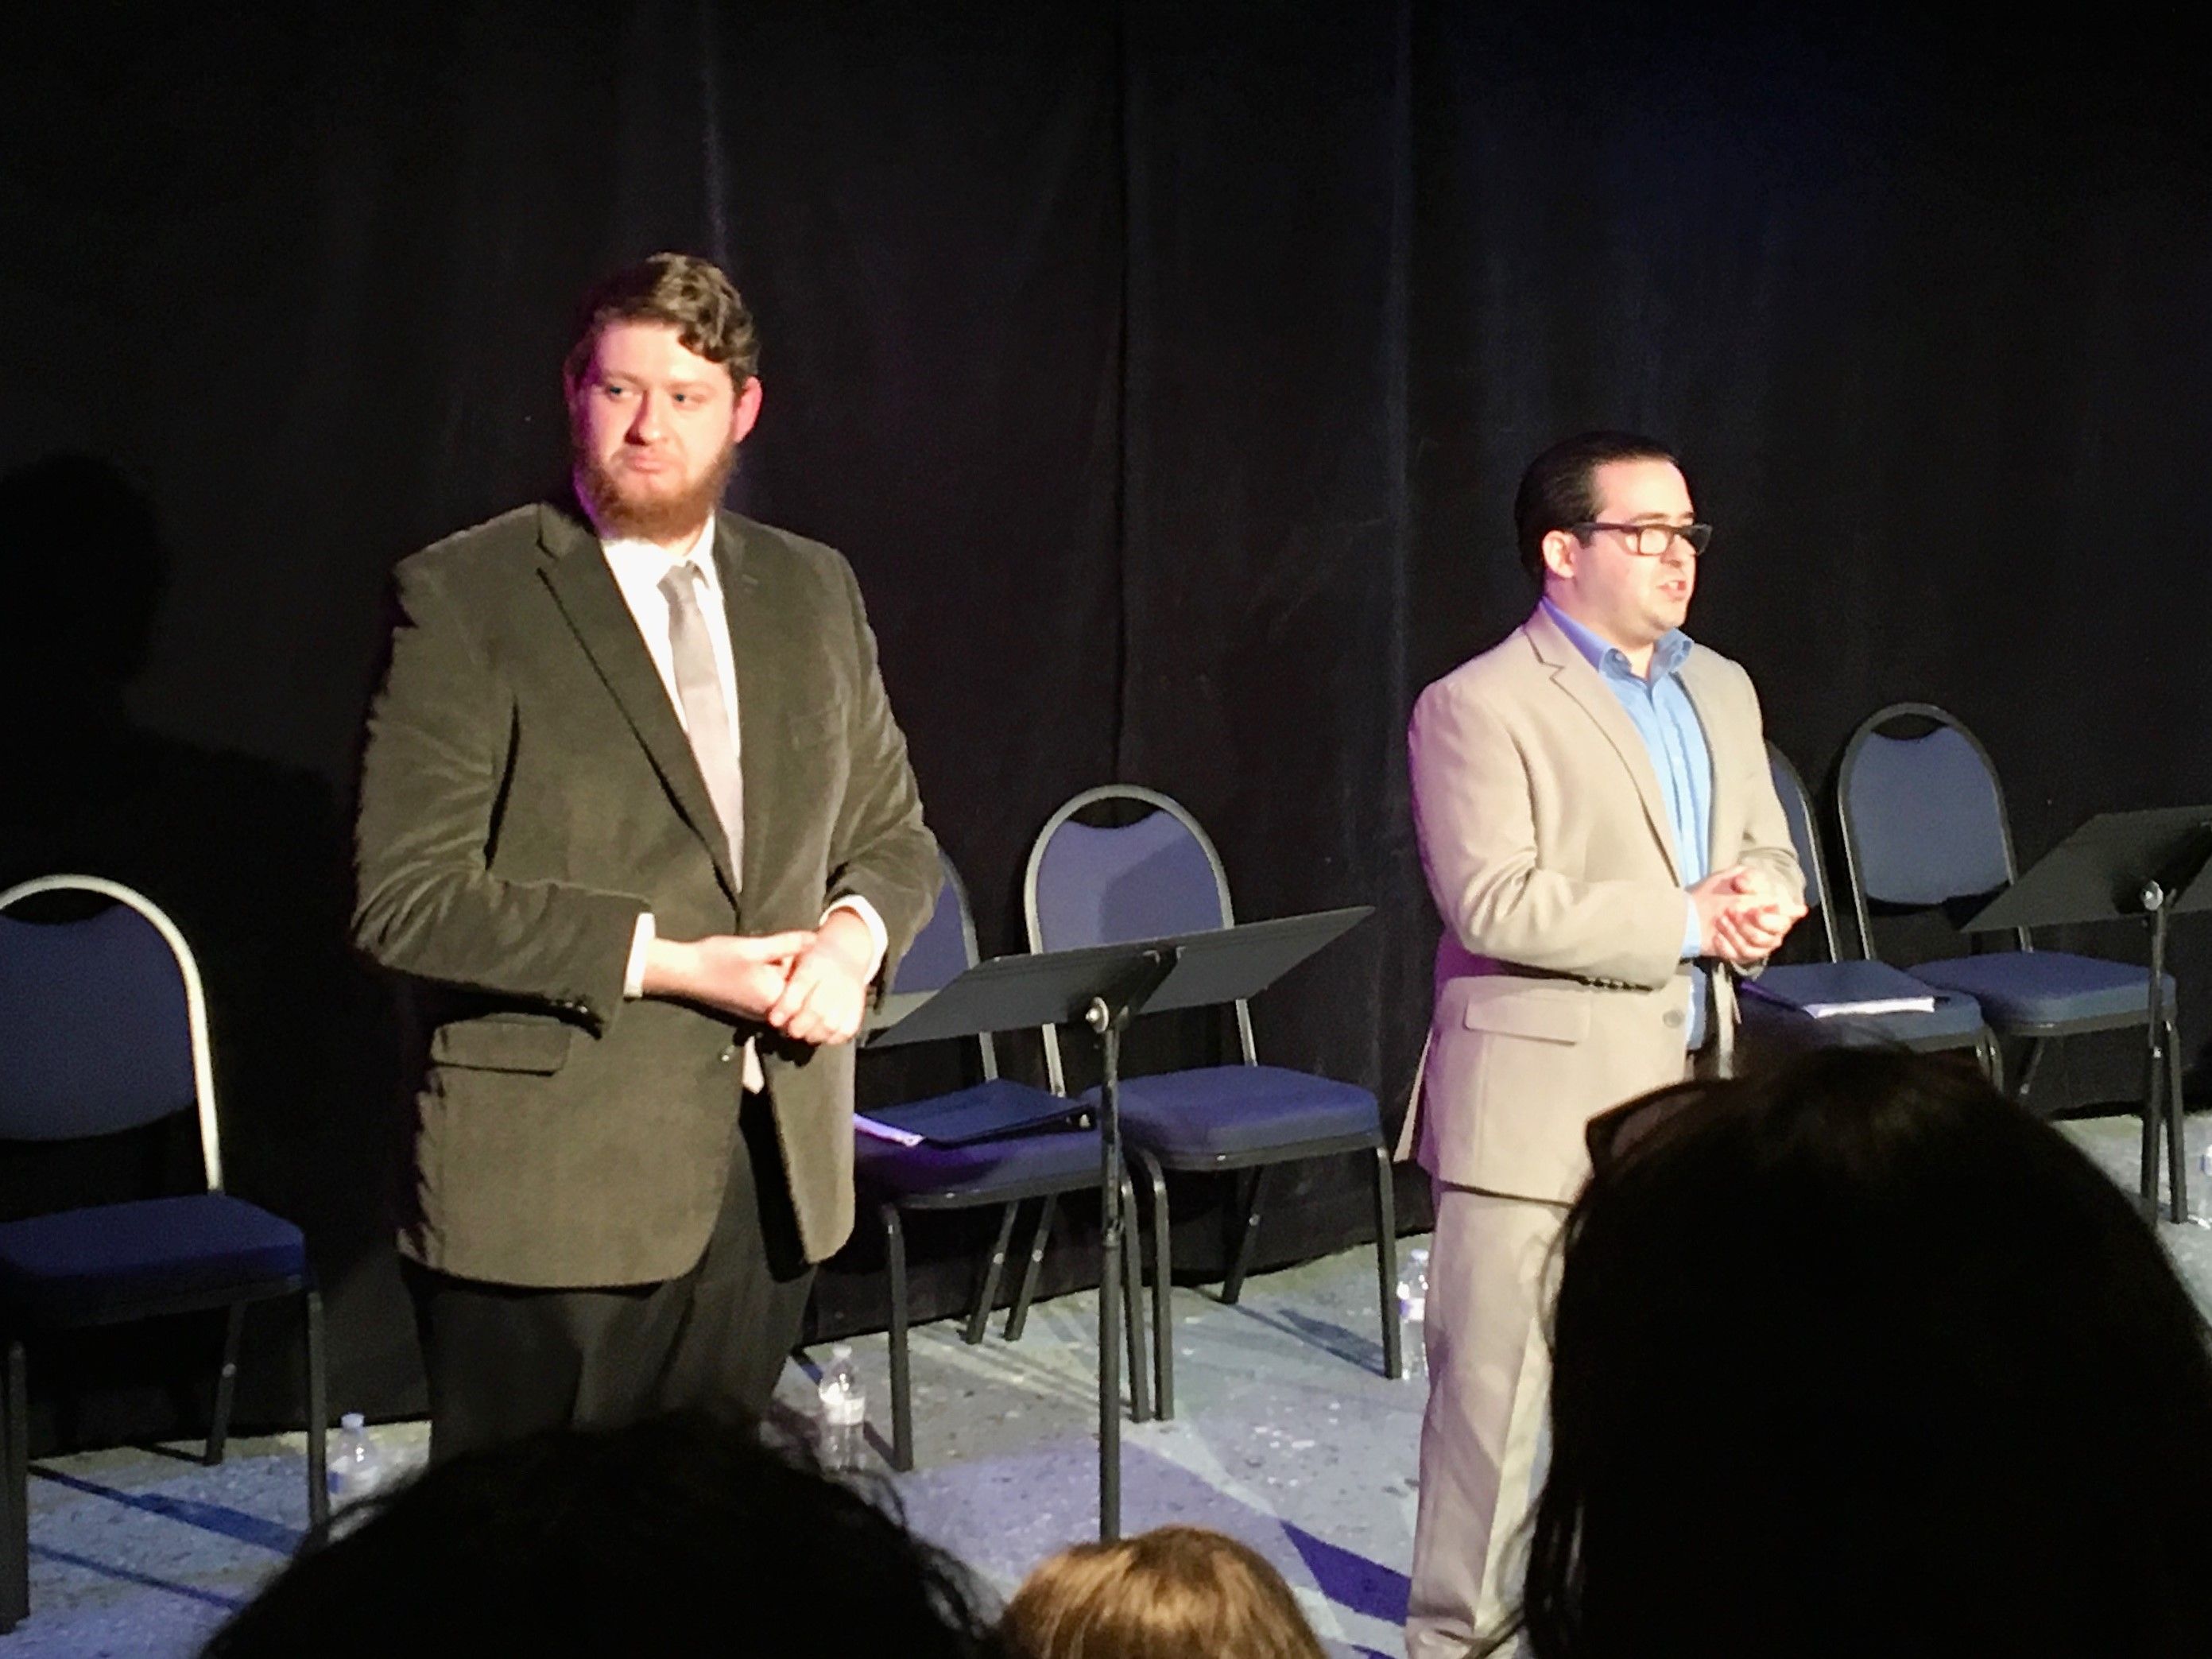 Prior to the premiere, Berardi and Myers had been  working on The Laramie Project since July. Photo by Sierra Dotson.